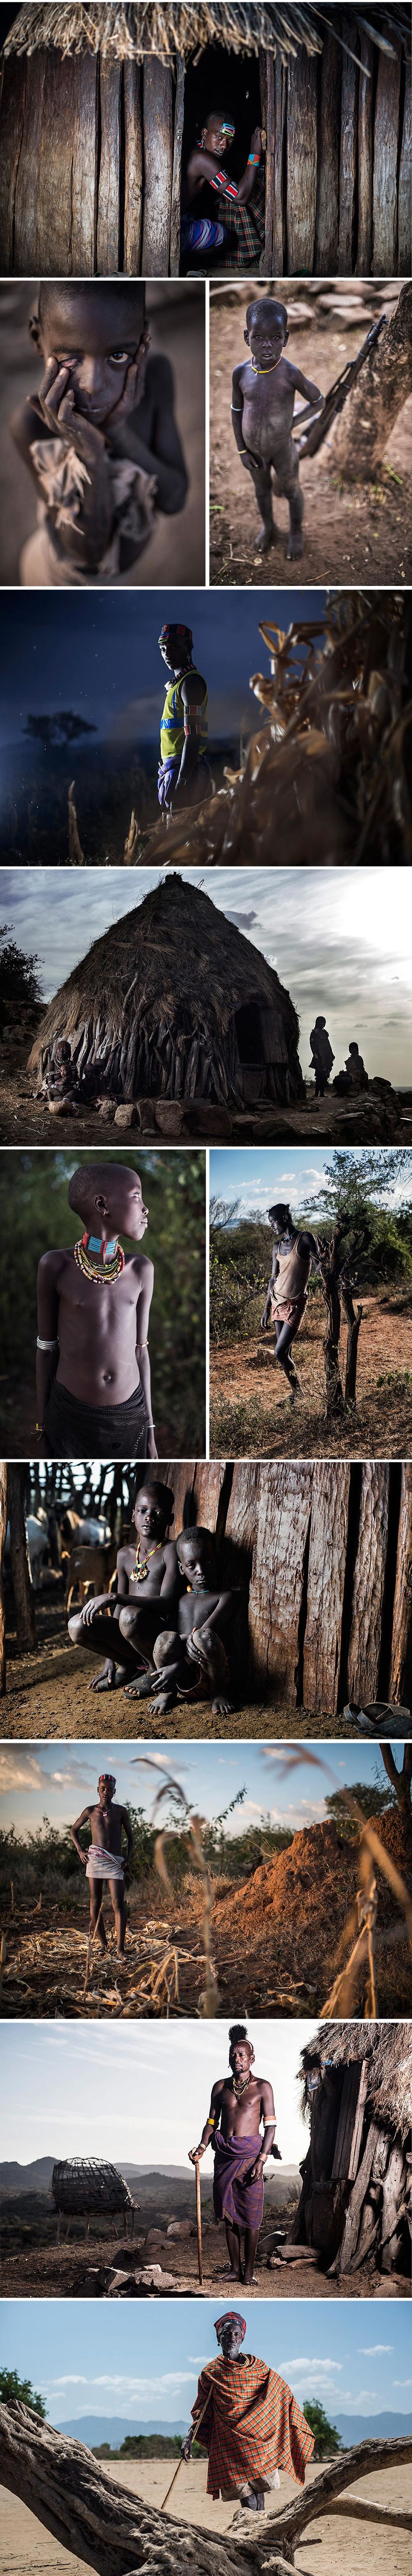 The Tribes Of Omo Valley, Ethiopia